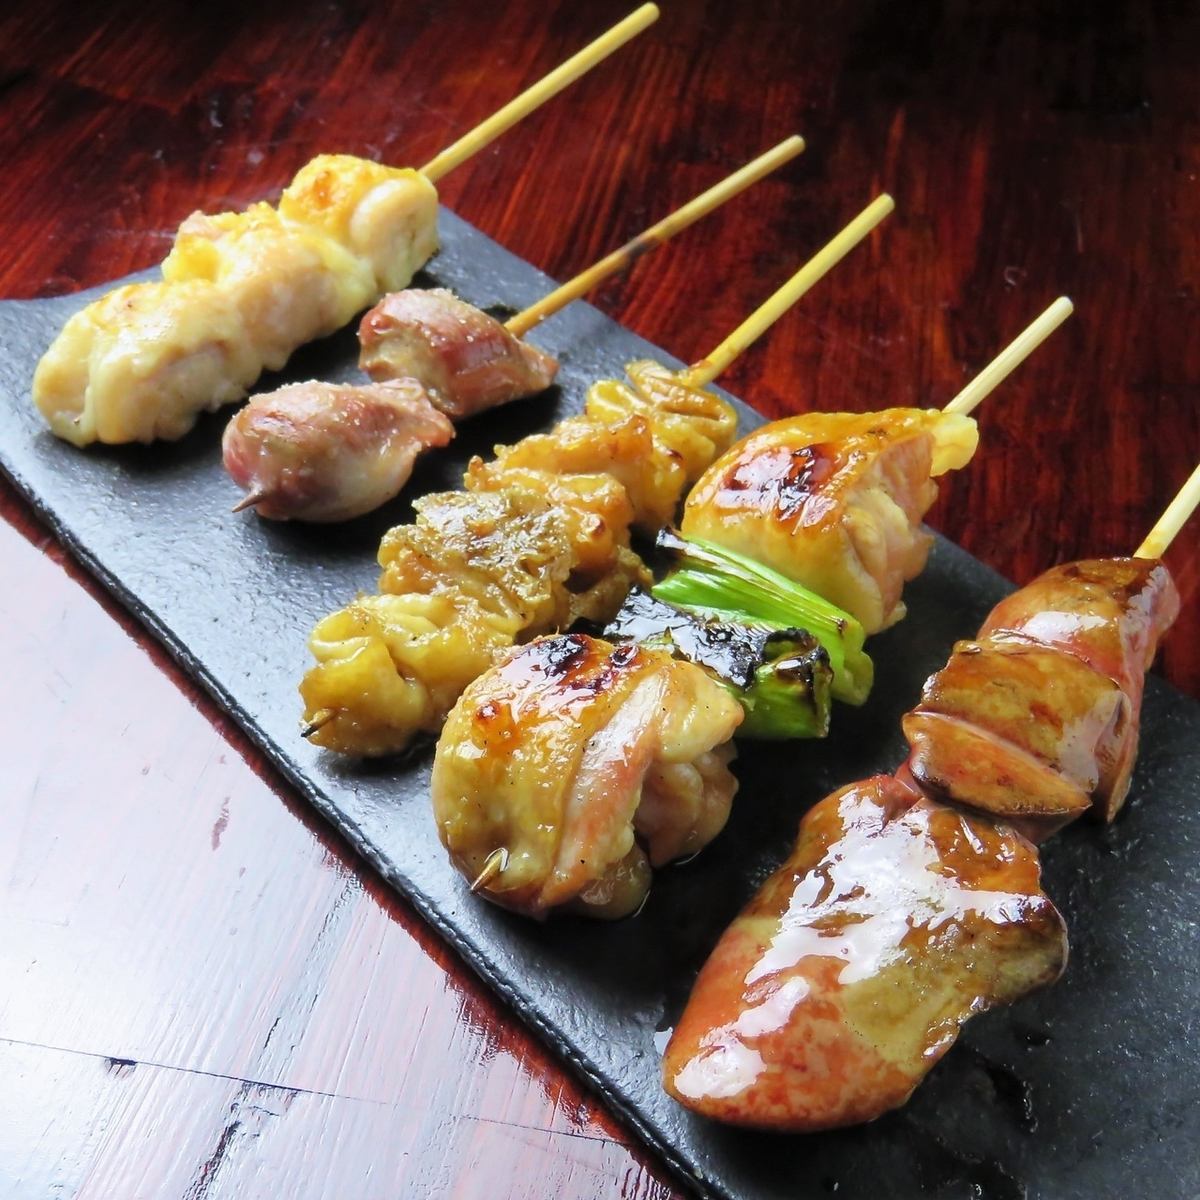 Enjoy charcoal-grilled yakitori in a completely private room!